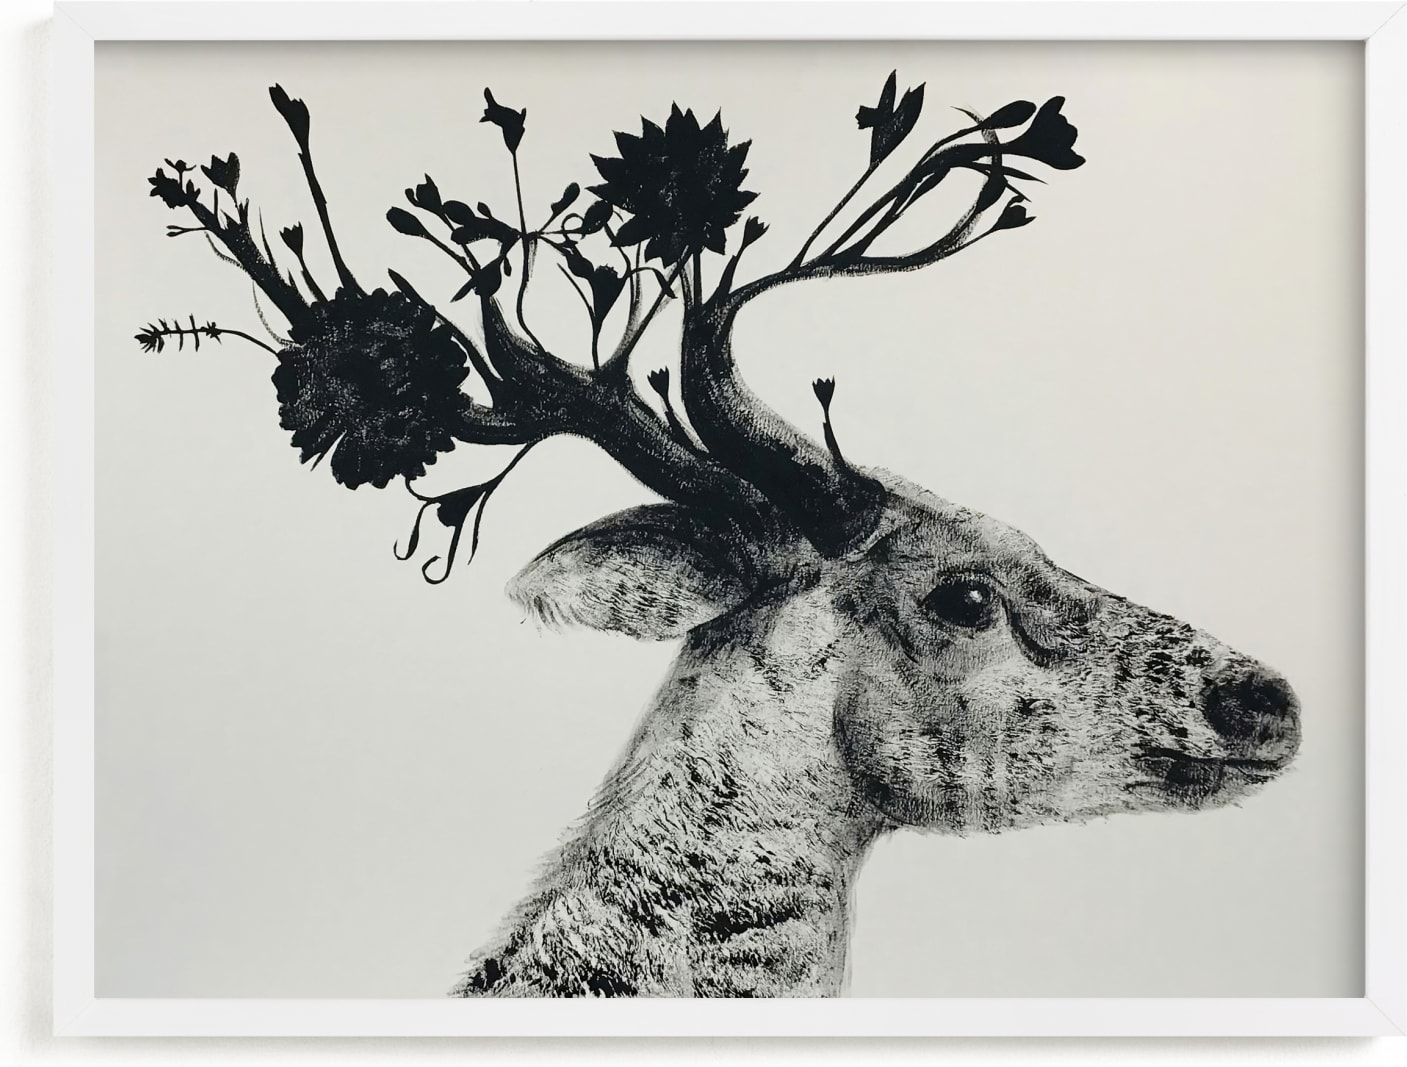 This is a black and white art by Holly Hudson called Flower Stag.